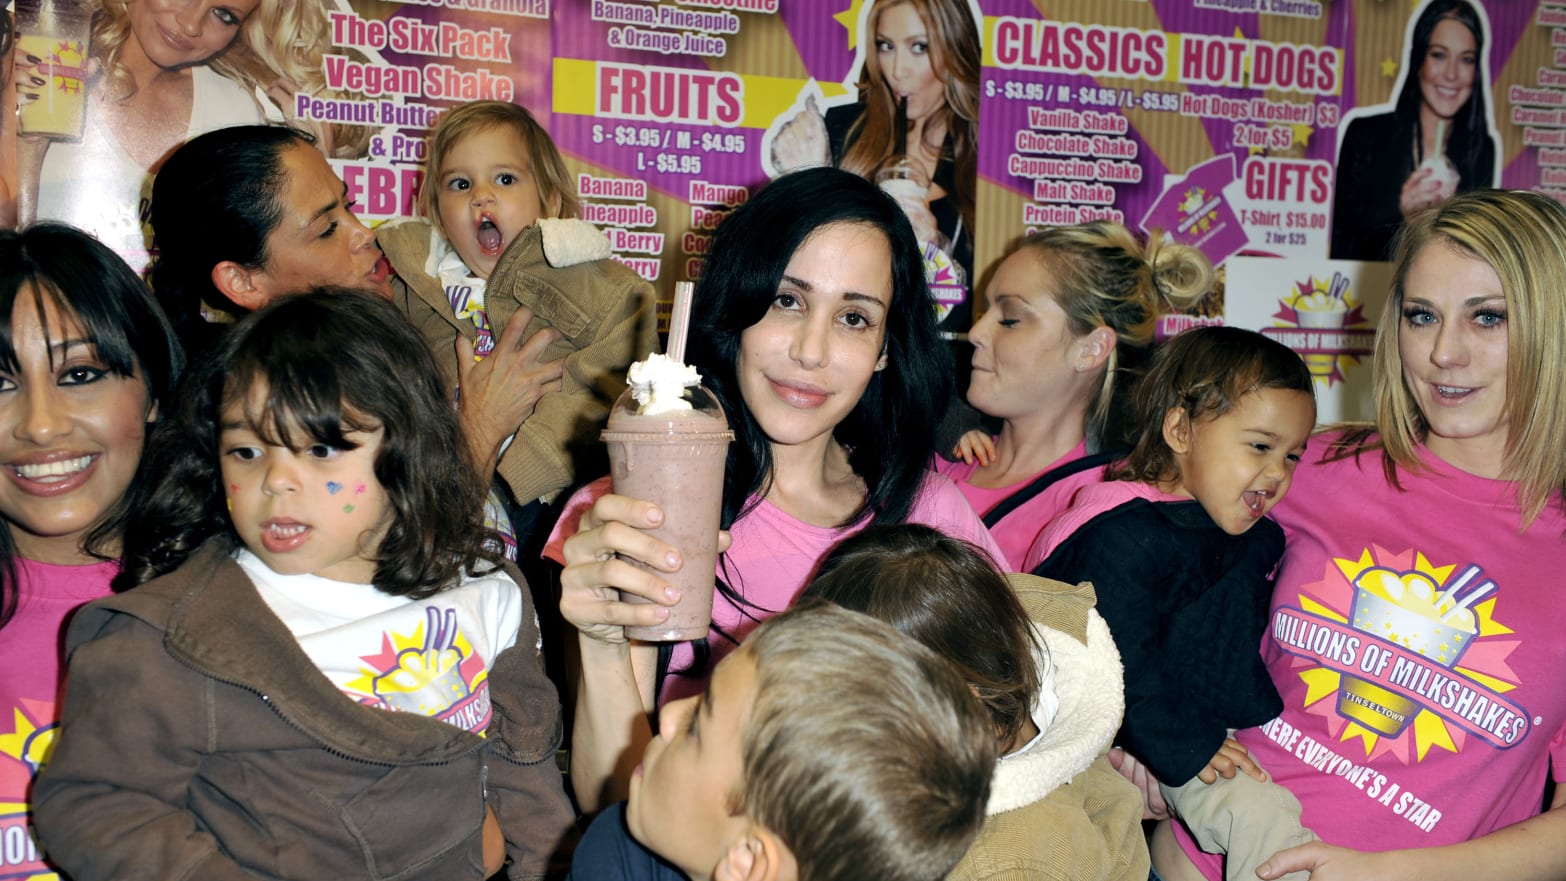 Octomom Nadya Suleman and her large family plus helpers launch their signature Milkshake at 'Millions of Milkshakes' on November 10, 2010 in West Hollywood, California.